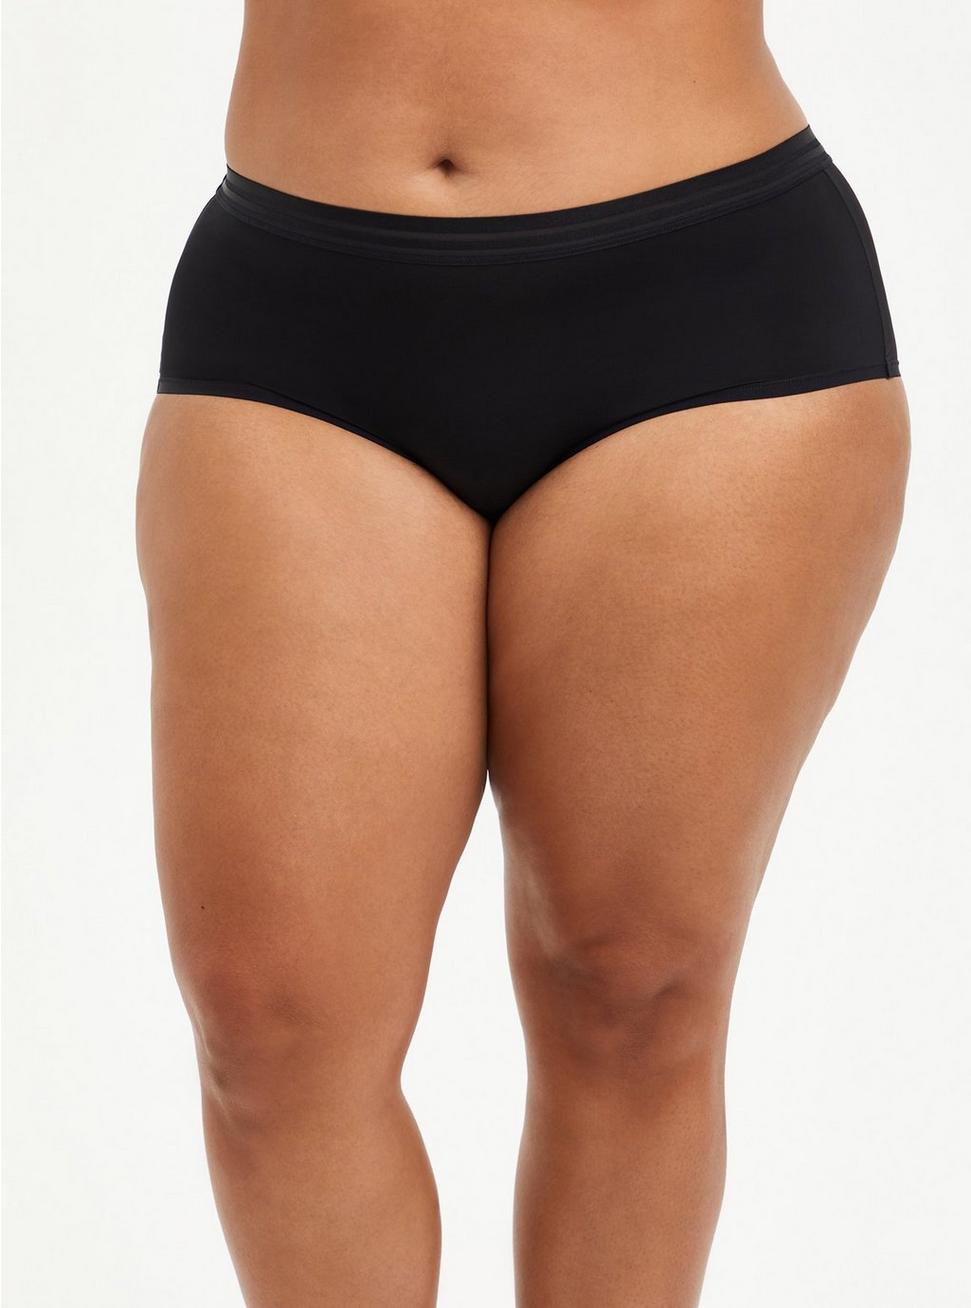 Plus Size Second Skin Mid-Rise Cheeky Panty, RICH BLACK, hi-res